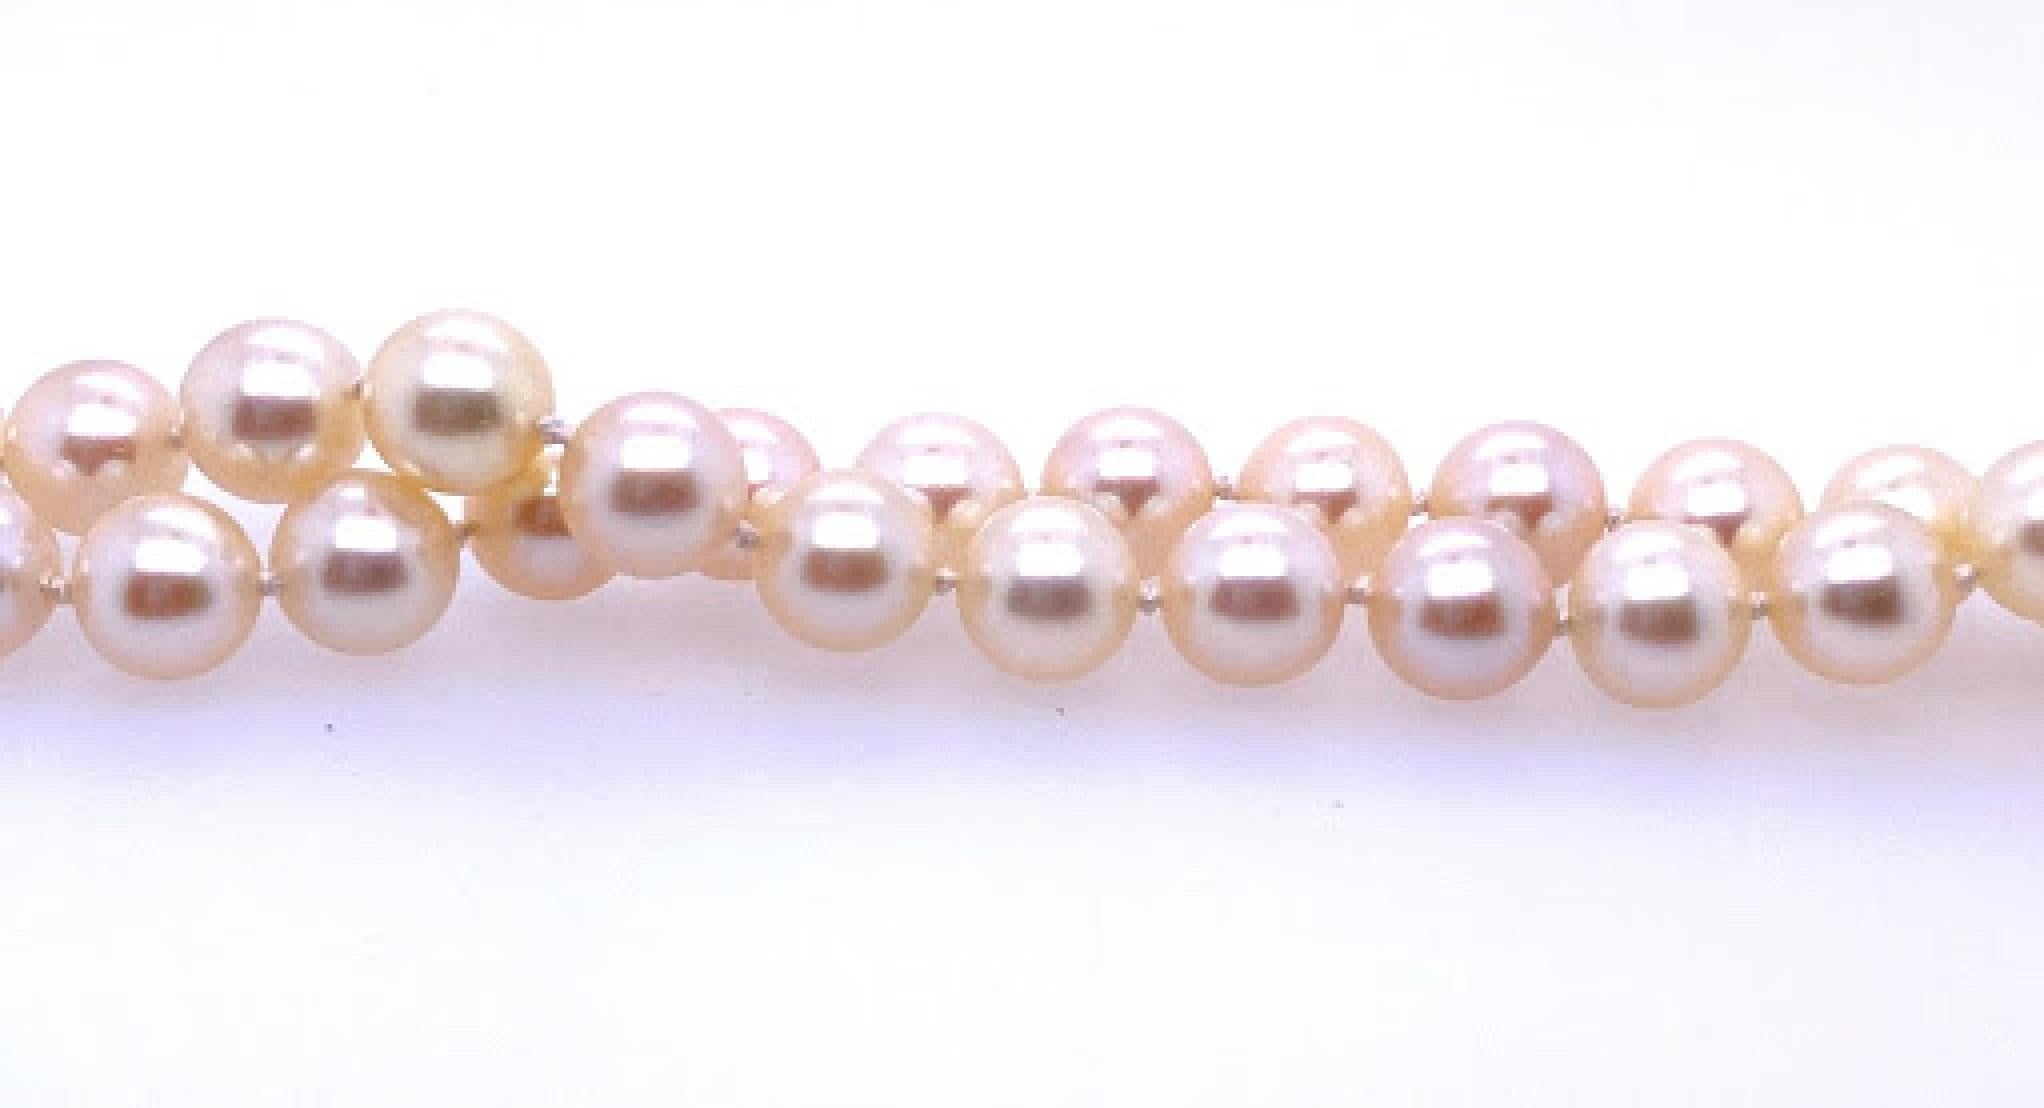 30’’ pearl strand, featuring 7.5 mm cultured akoya pearls, totaling 91 pearls. Necklace has a 14 karat yellow gold ( stamped 14K) barrel clasp that measures 8mm long by 5.5mm wide. 